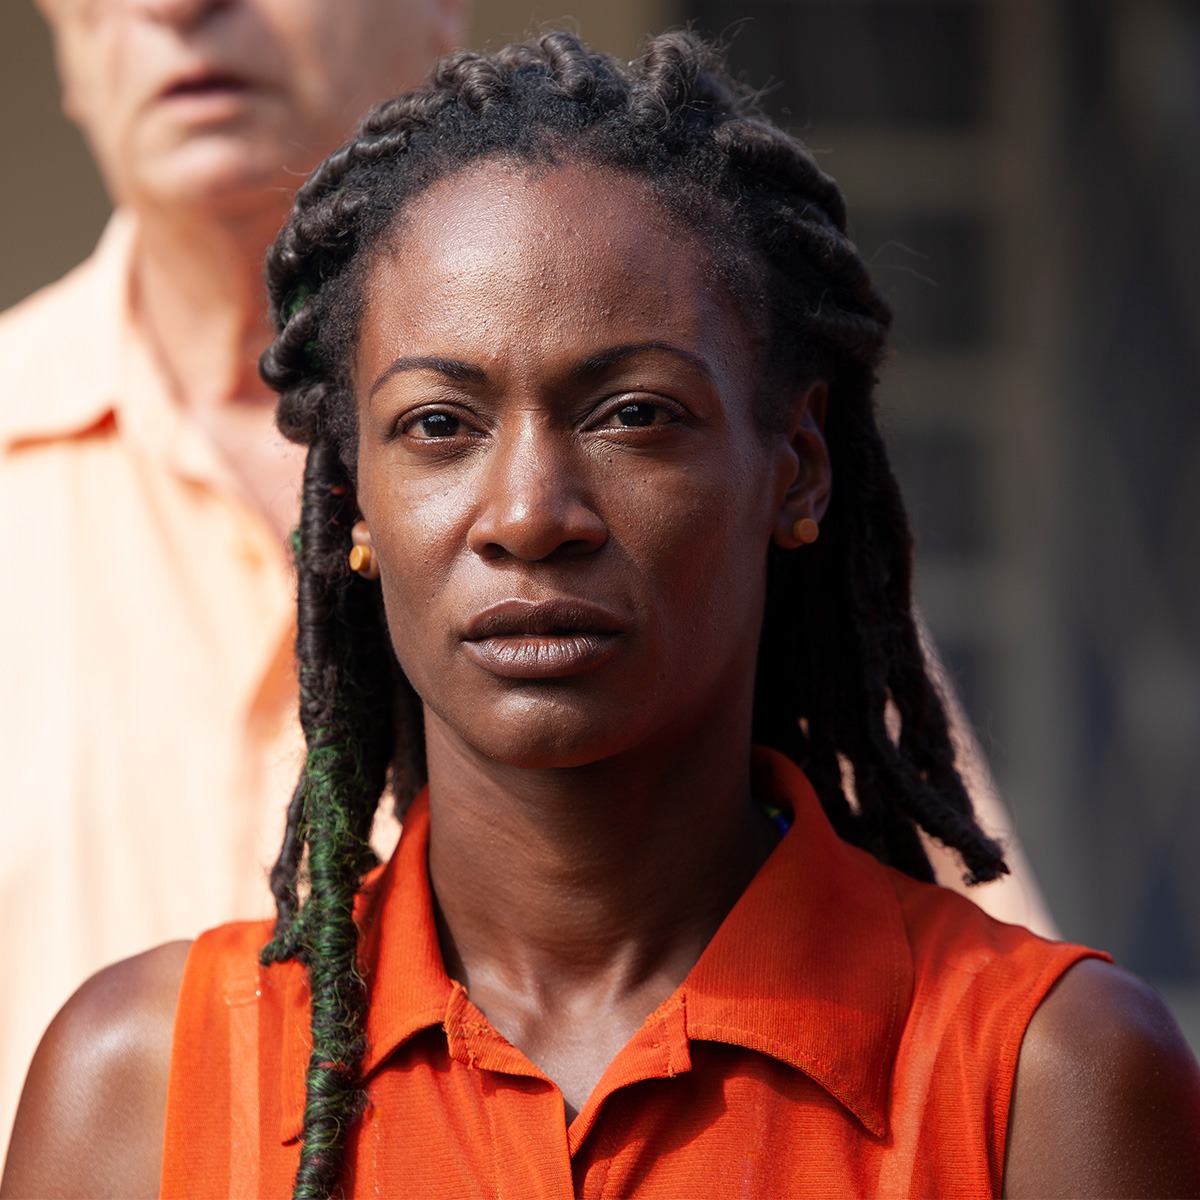 a woman with black hair in an orange shirt standing in front of a man.